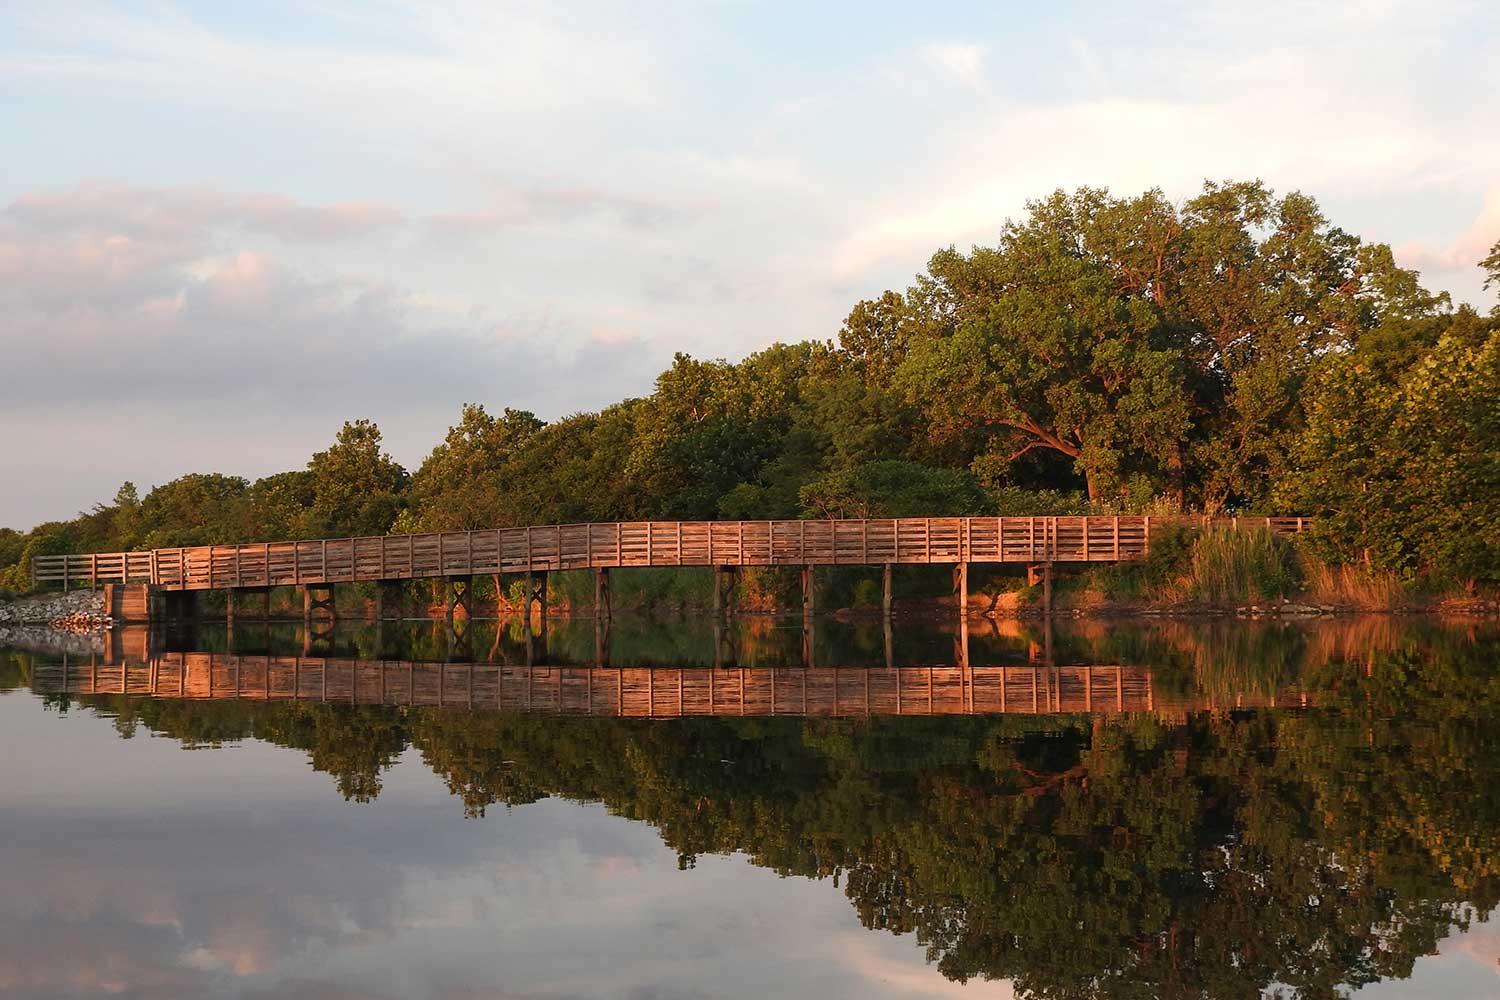 A wooden bridge reflected in the still water of a lake with trees in the background.